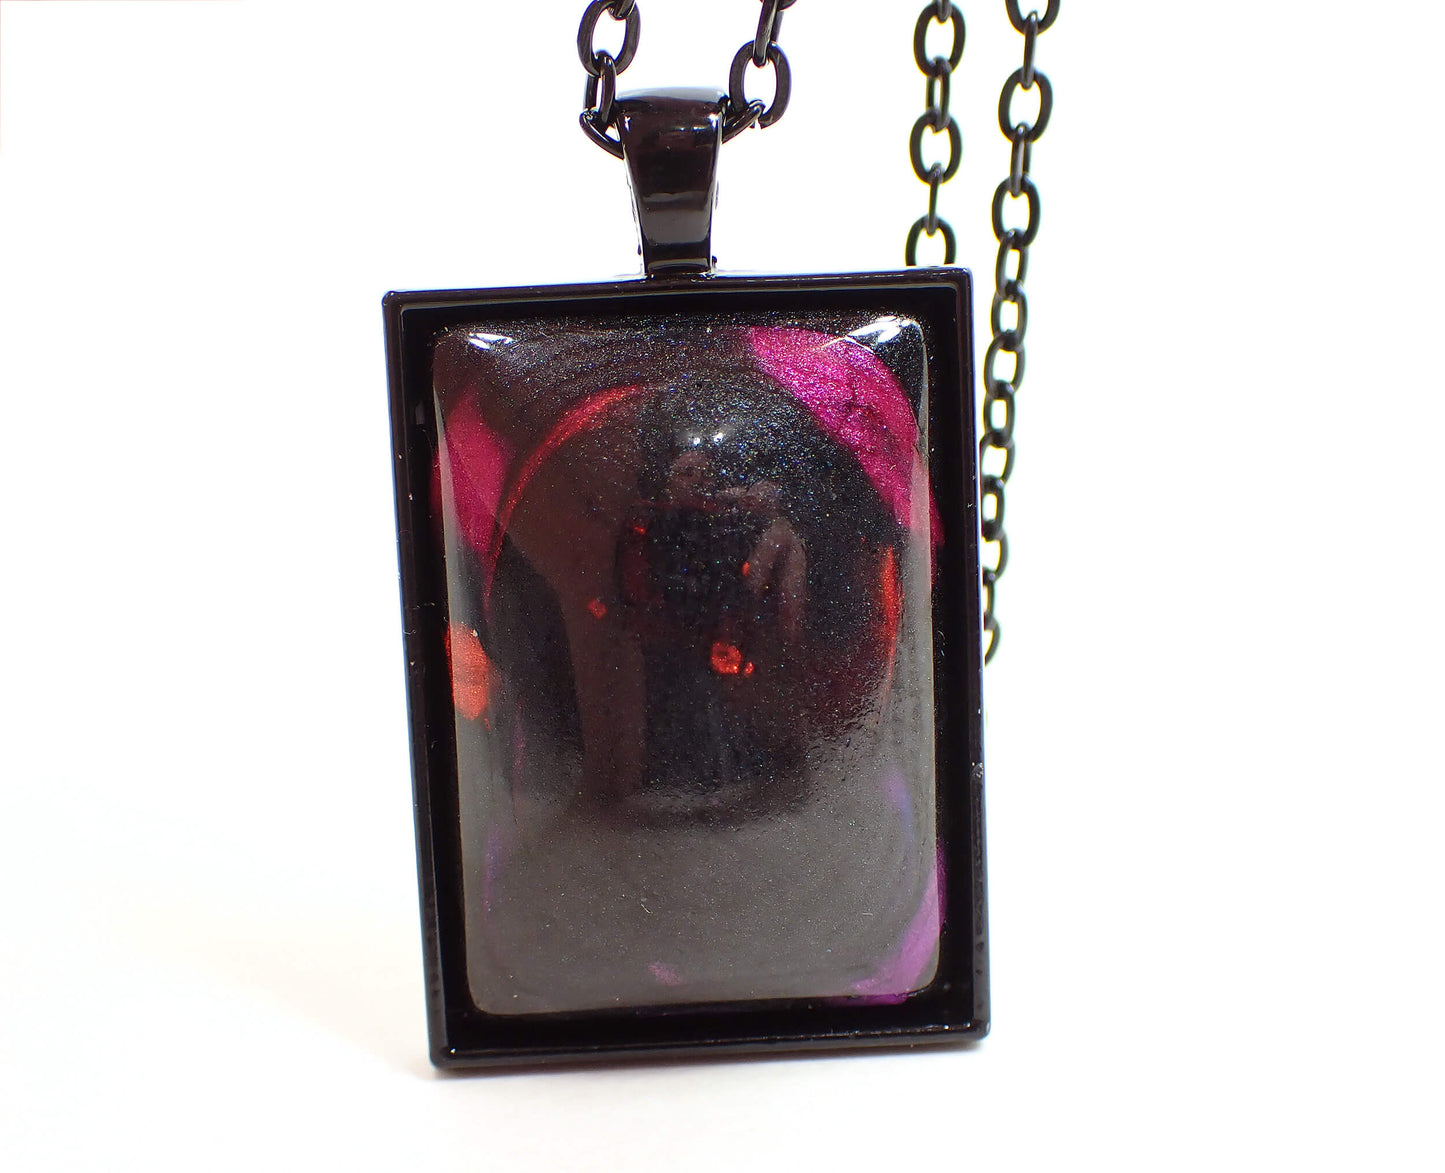 Goth Handmade Resin Large Black Rectangle Pendant Necklace with Splashes of Color